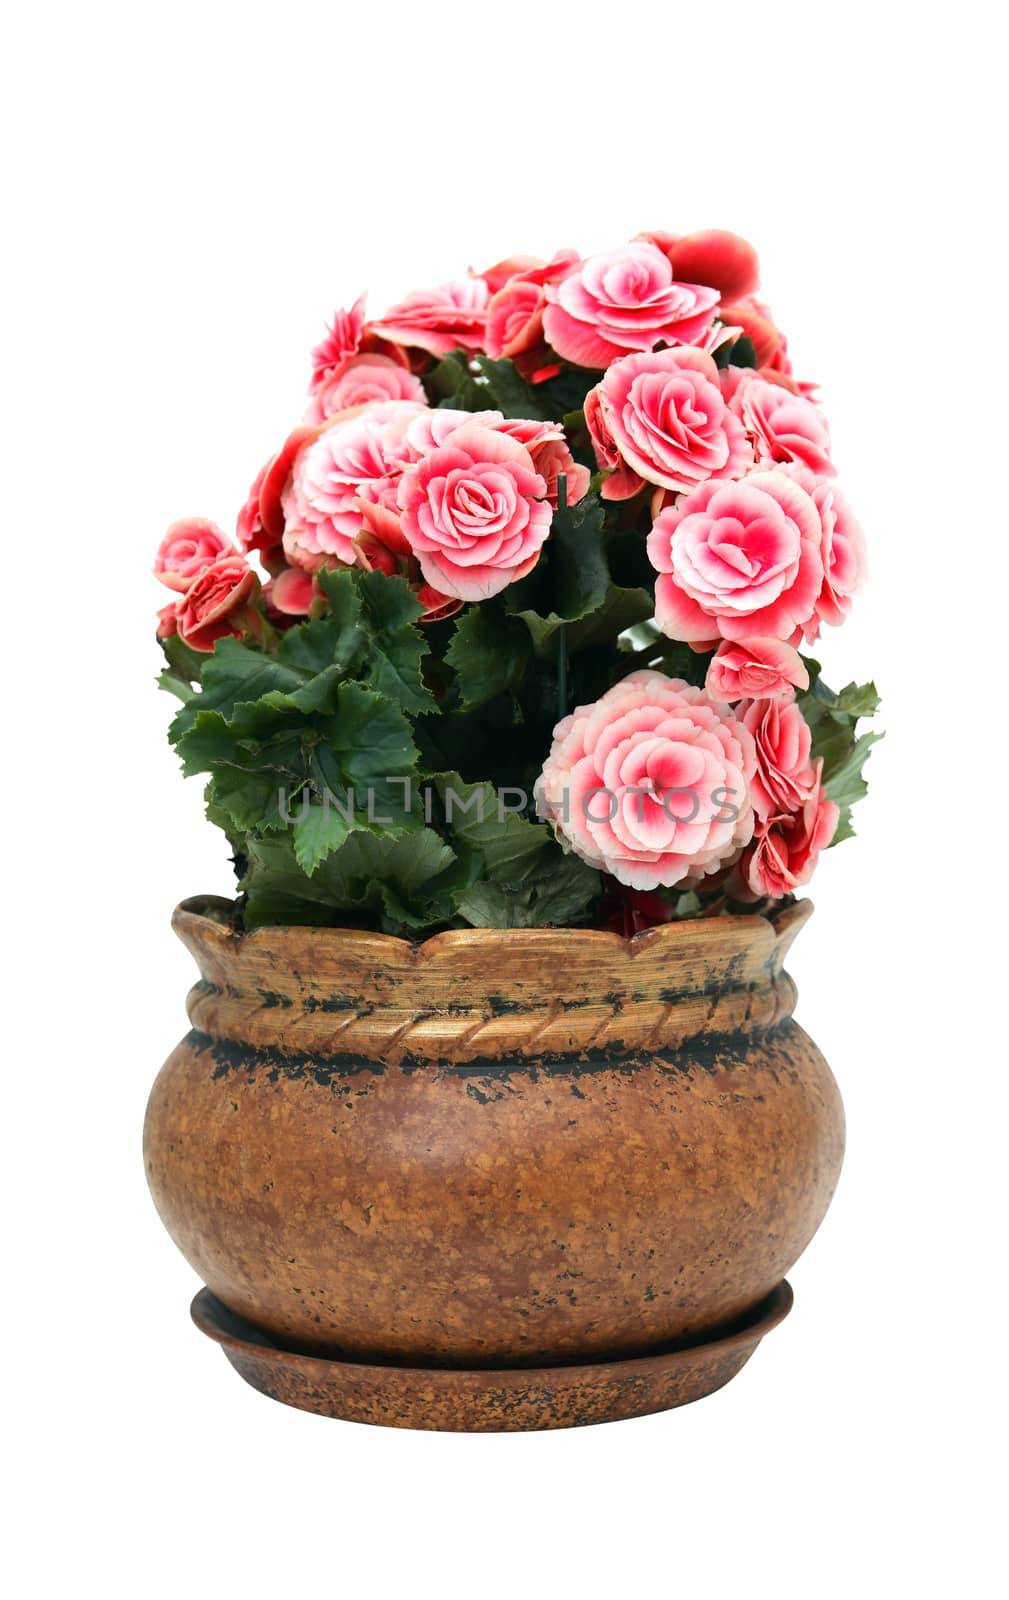 Flowers In Pot Isolated by kvkirillov